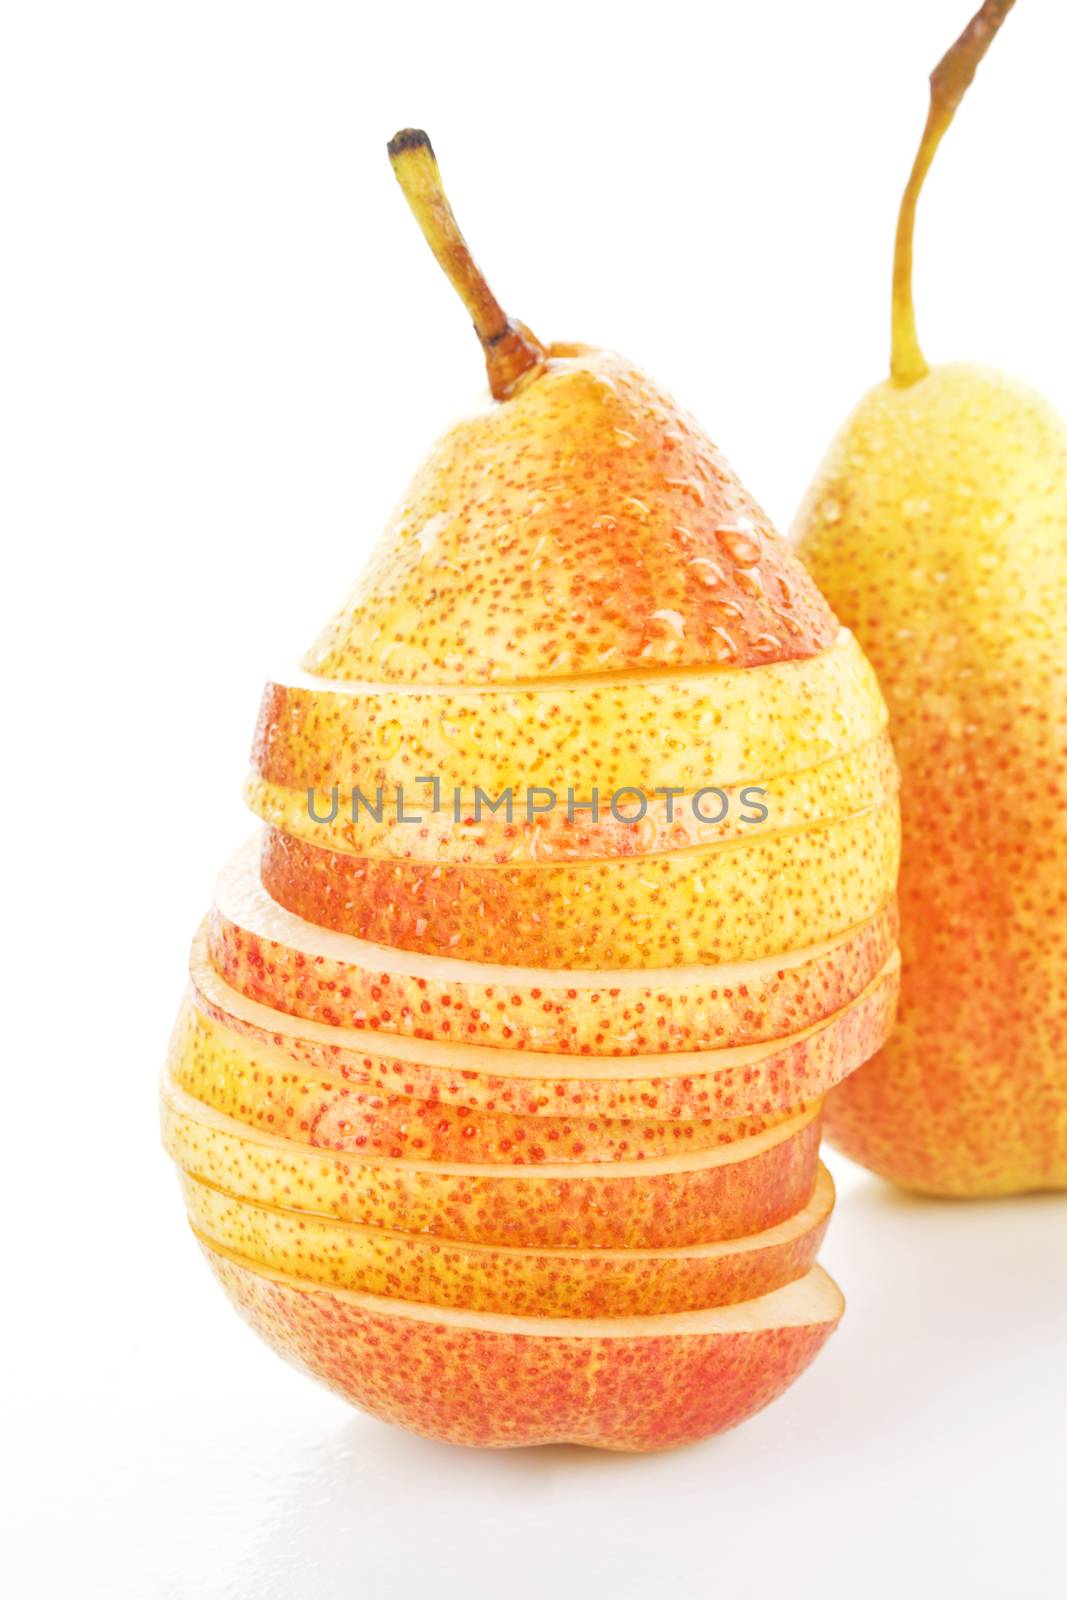 Fresh ripe pear in slices close up. Healthy fruit background.